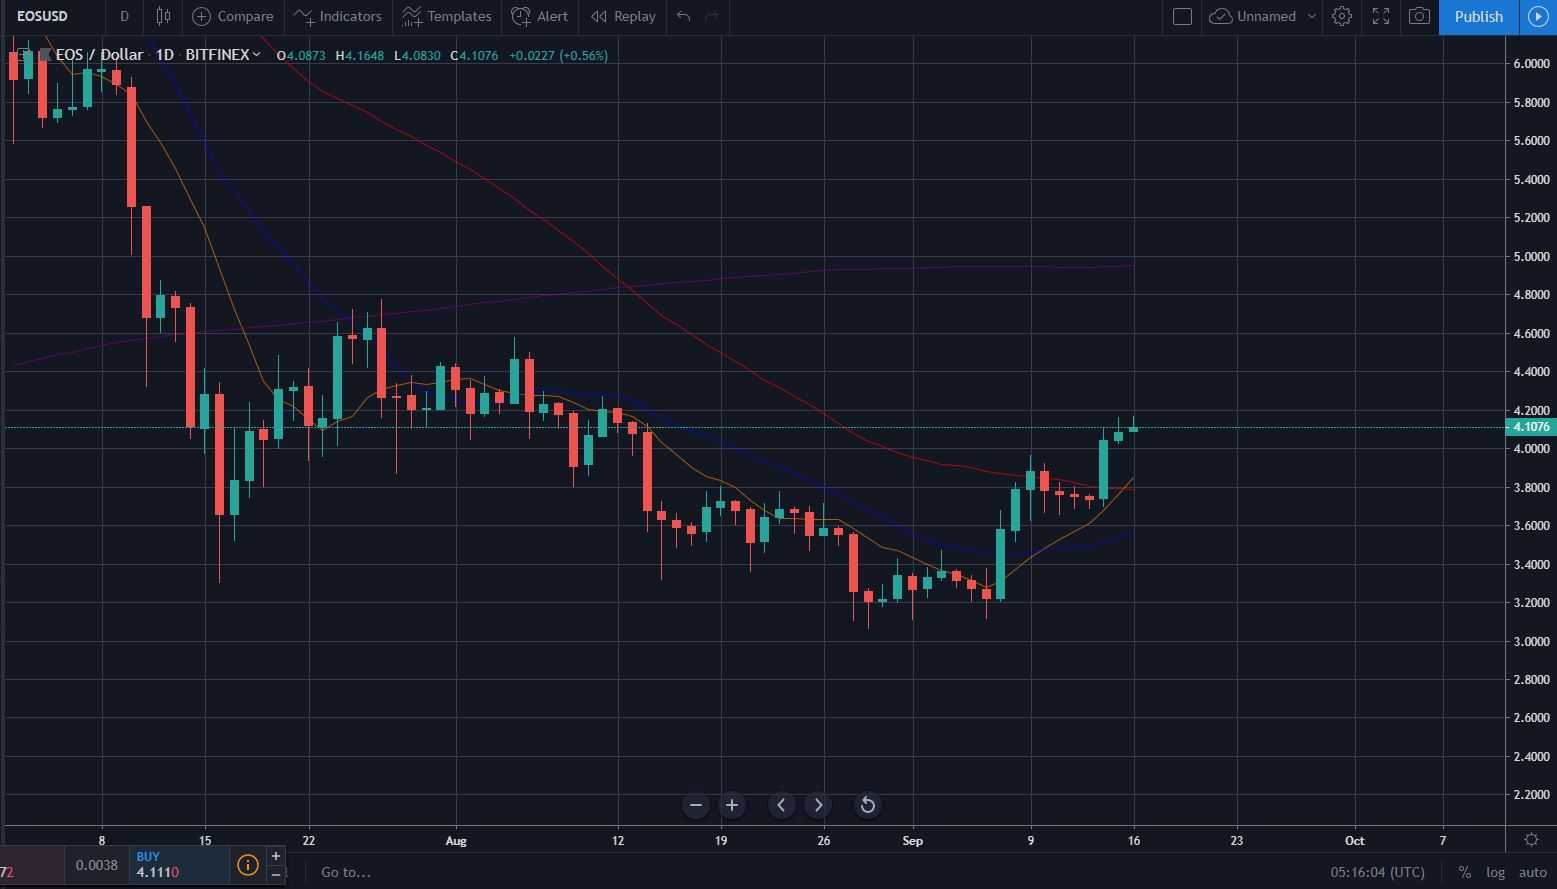 Bitcoin, Ether, and XRP Weekly Market Update September 16, 2019 - 4